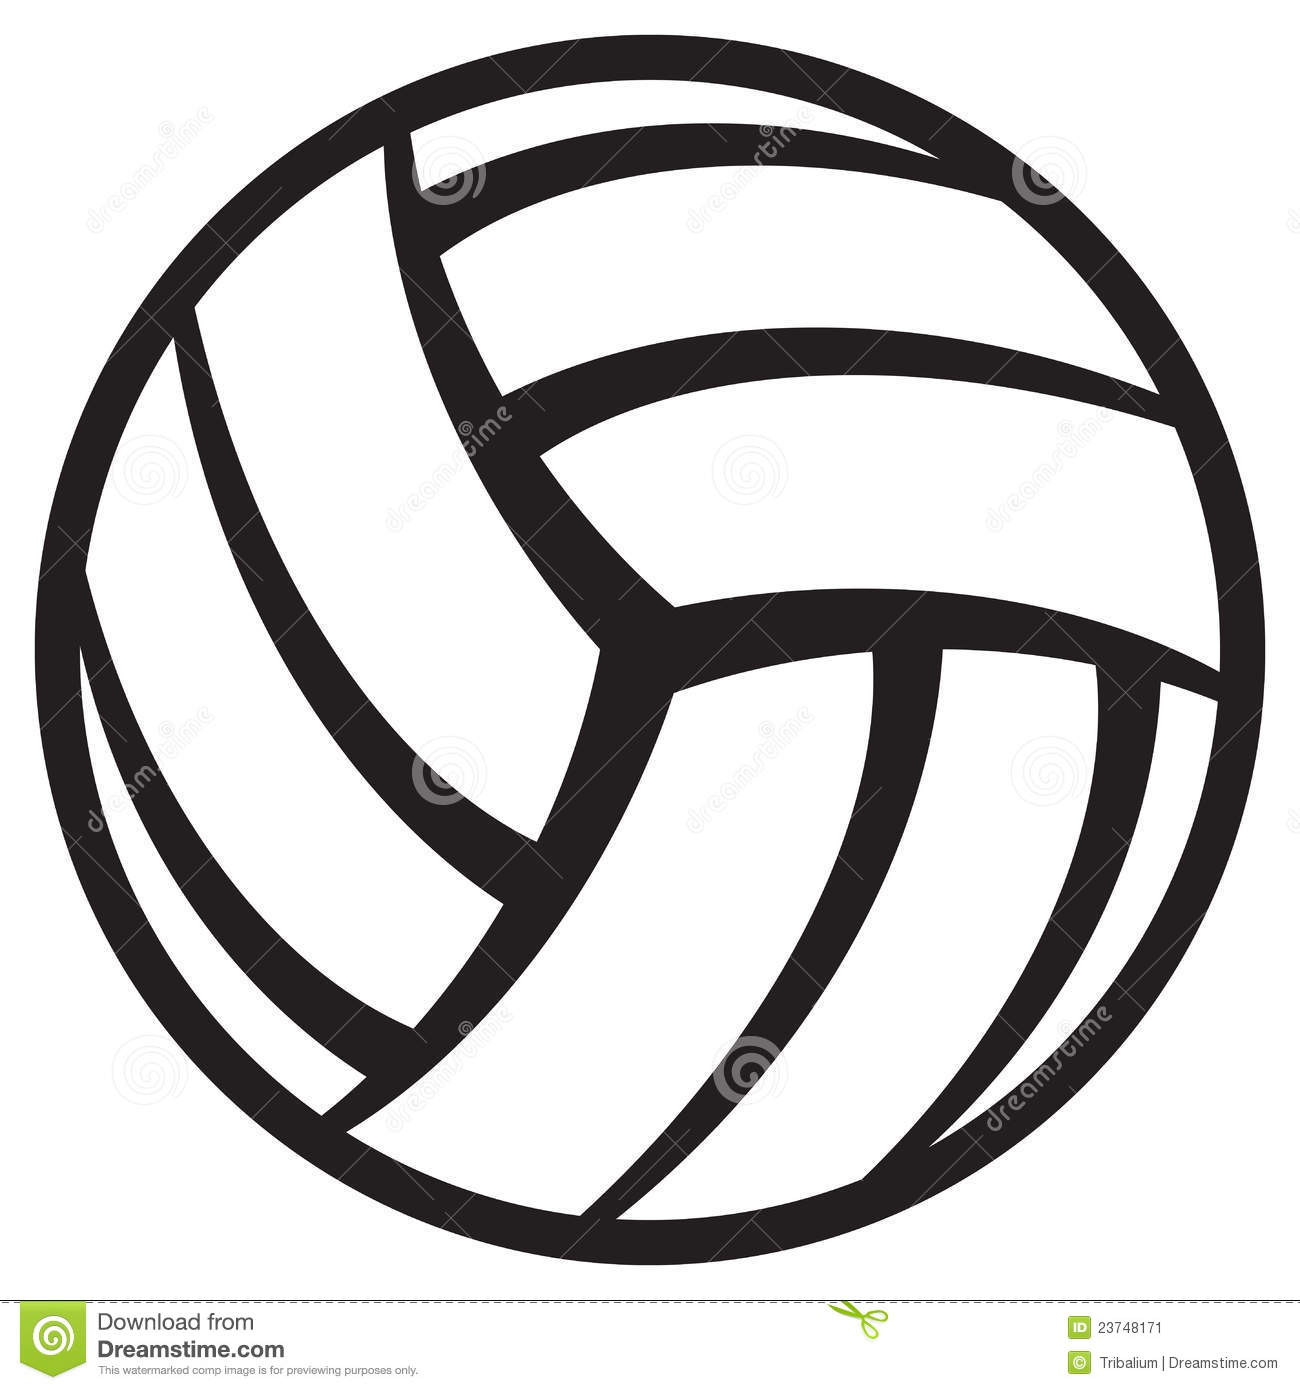 Volleyball clipart clipart cliparts for you